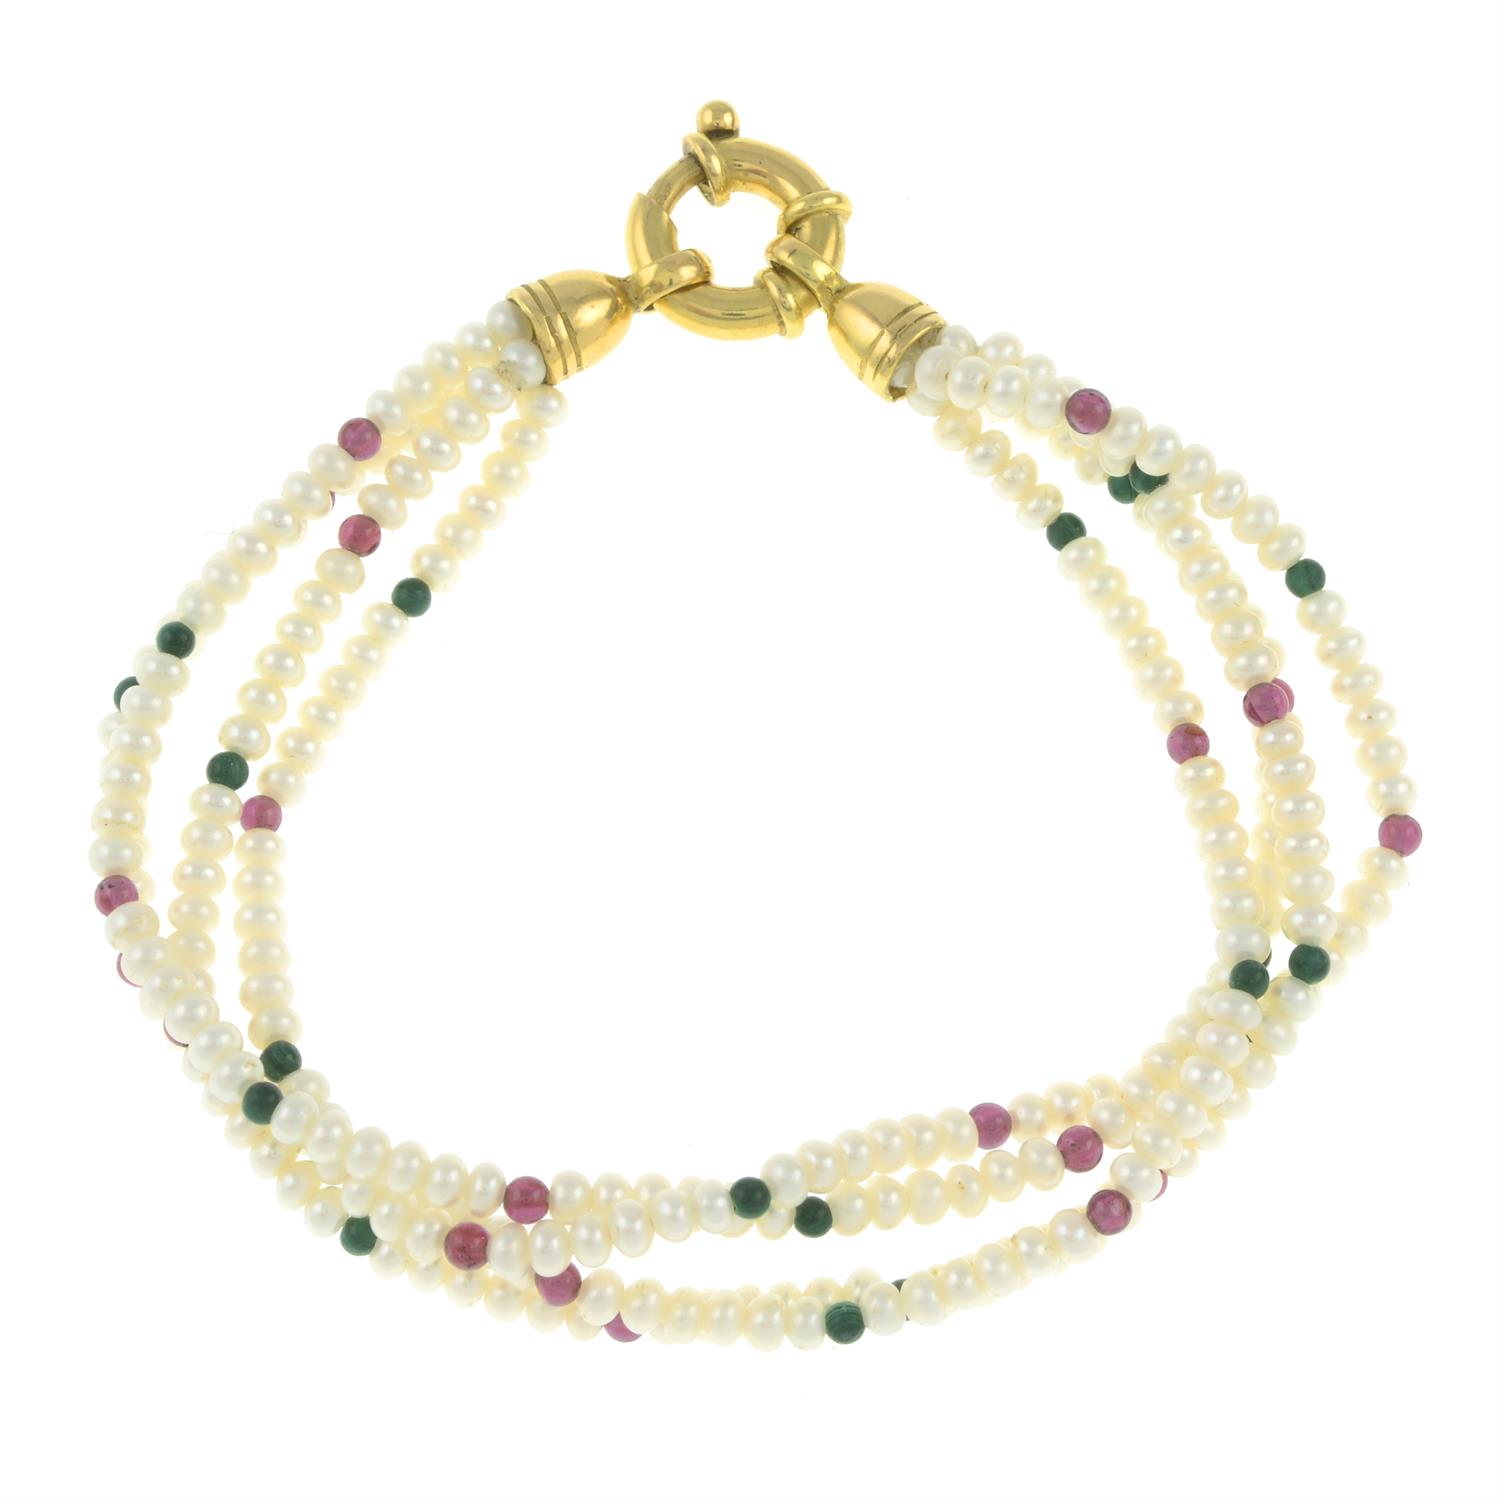 Cultured pearl bracelet, with garnet & malachite spacers